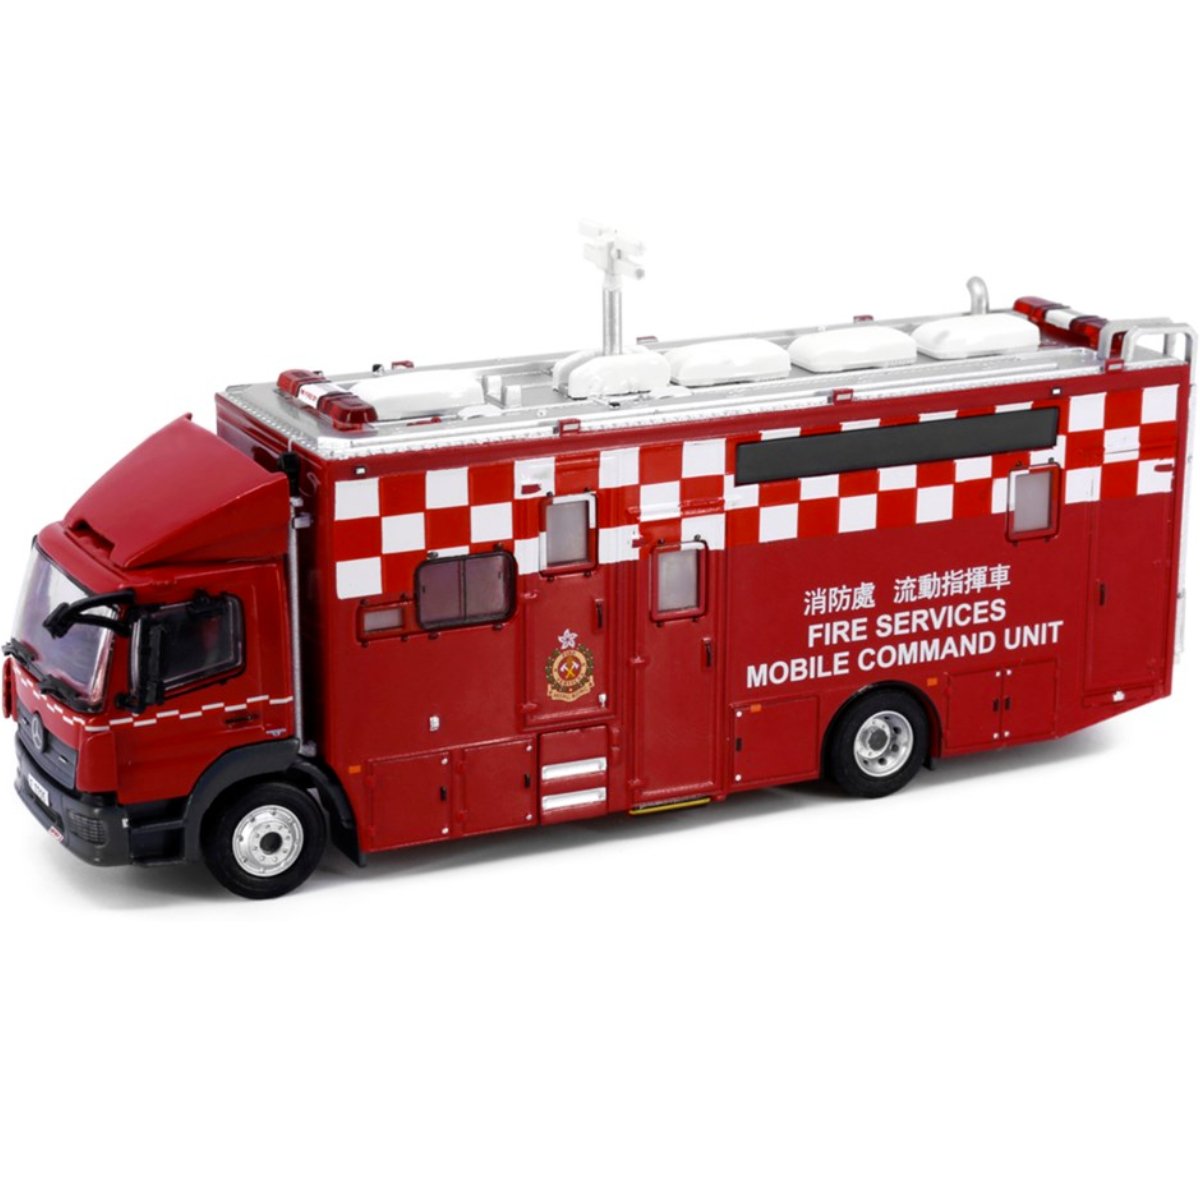 Tiny Models Mercedes Atego Fire Services Mobile Command Unit (1:76 Scale) - Phillips Hobbies